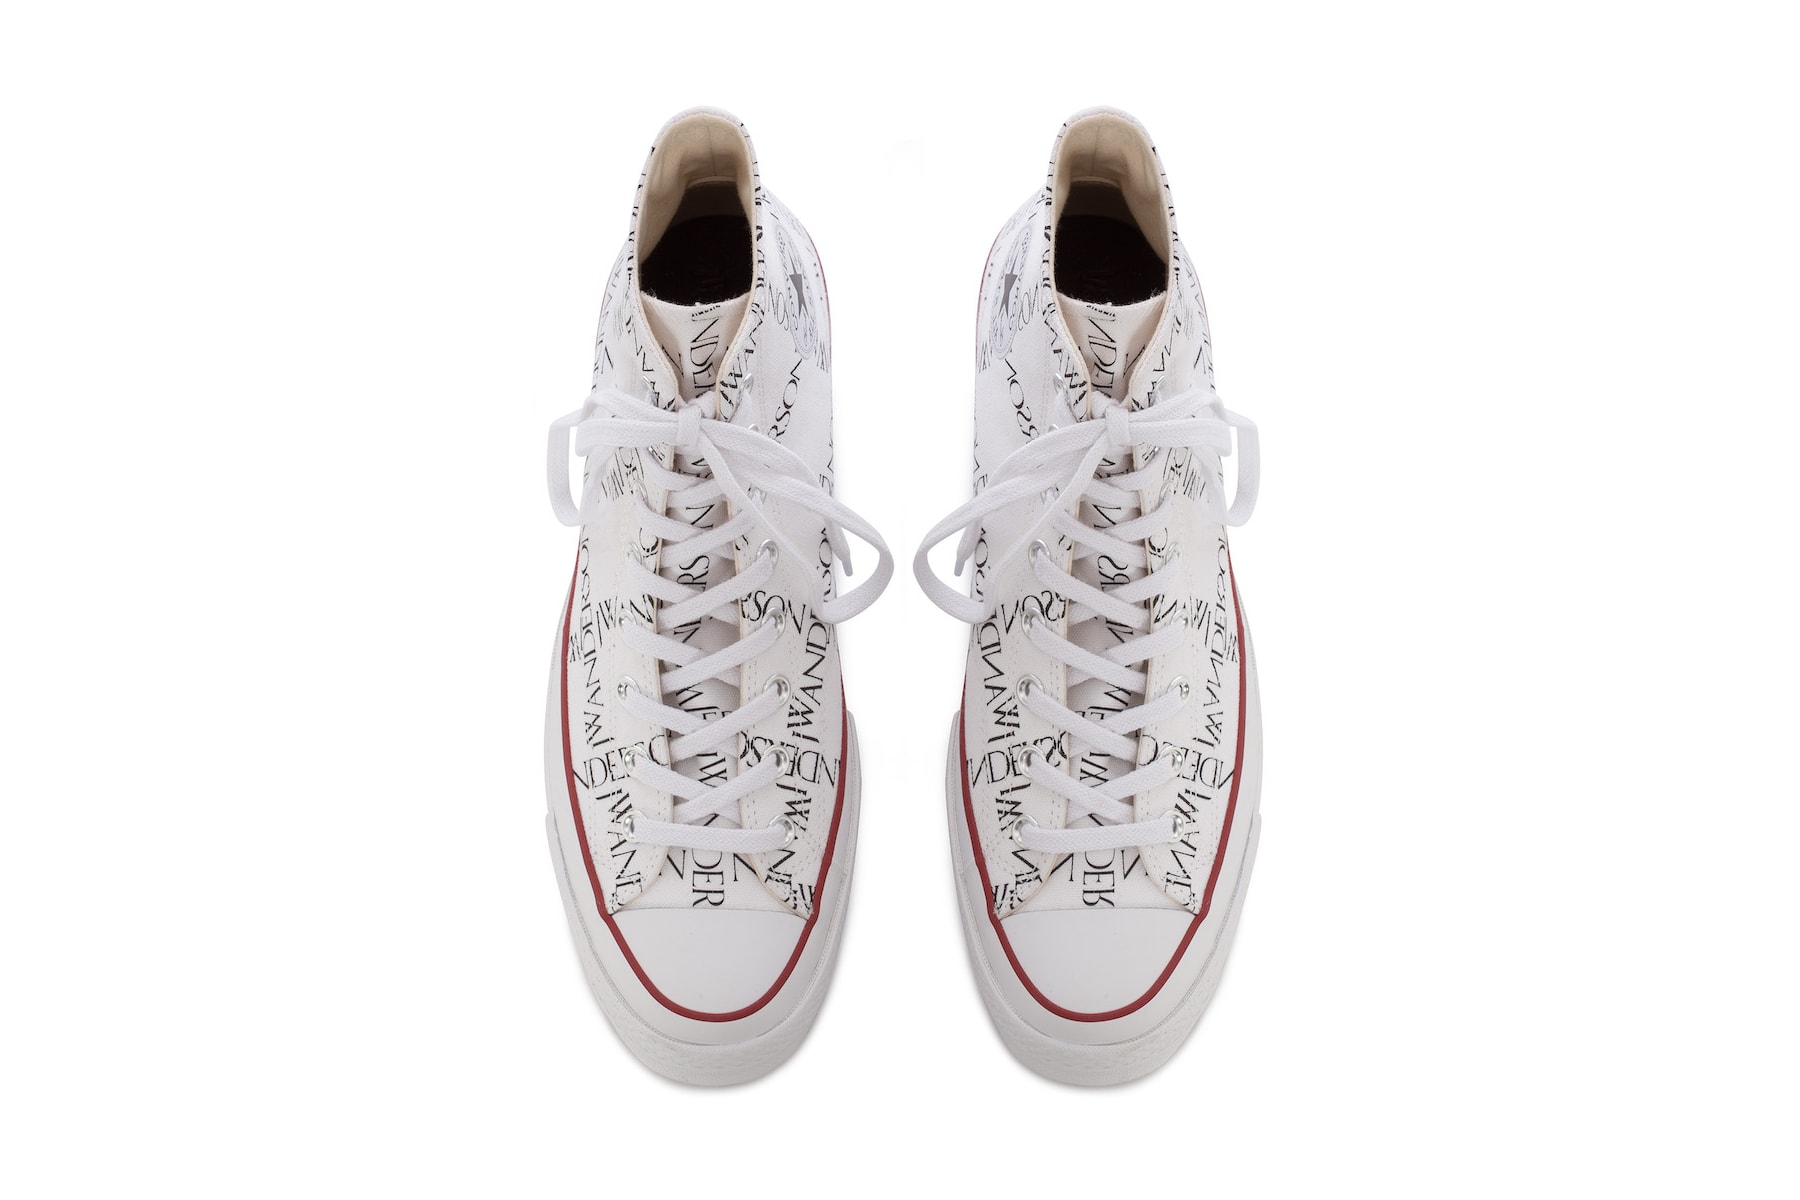 J.W.Anderson x Converse Collection Release Info